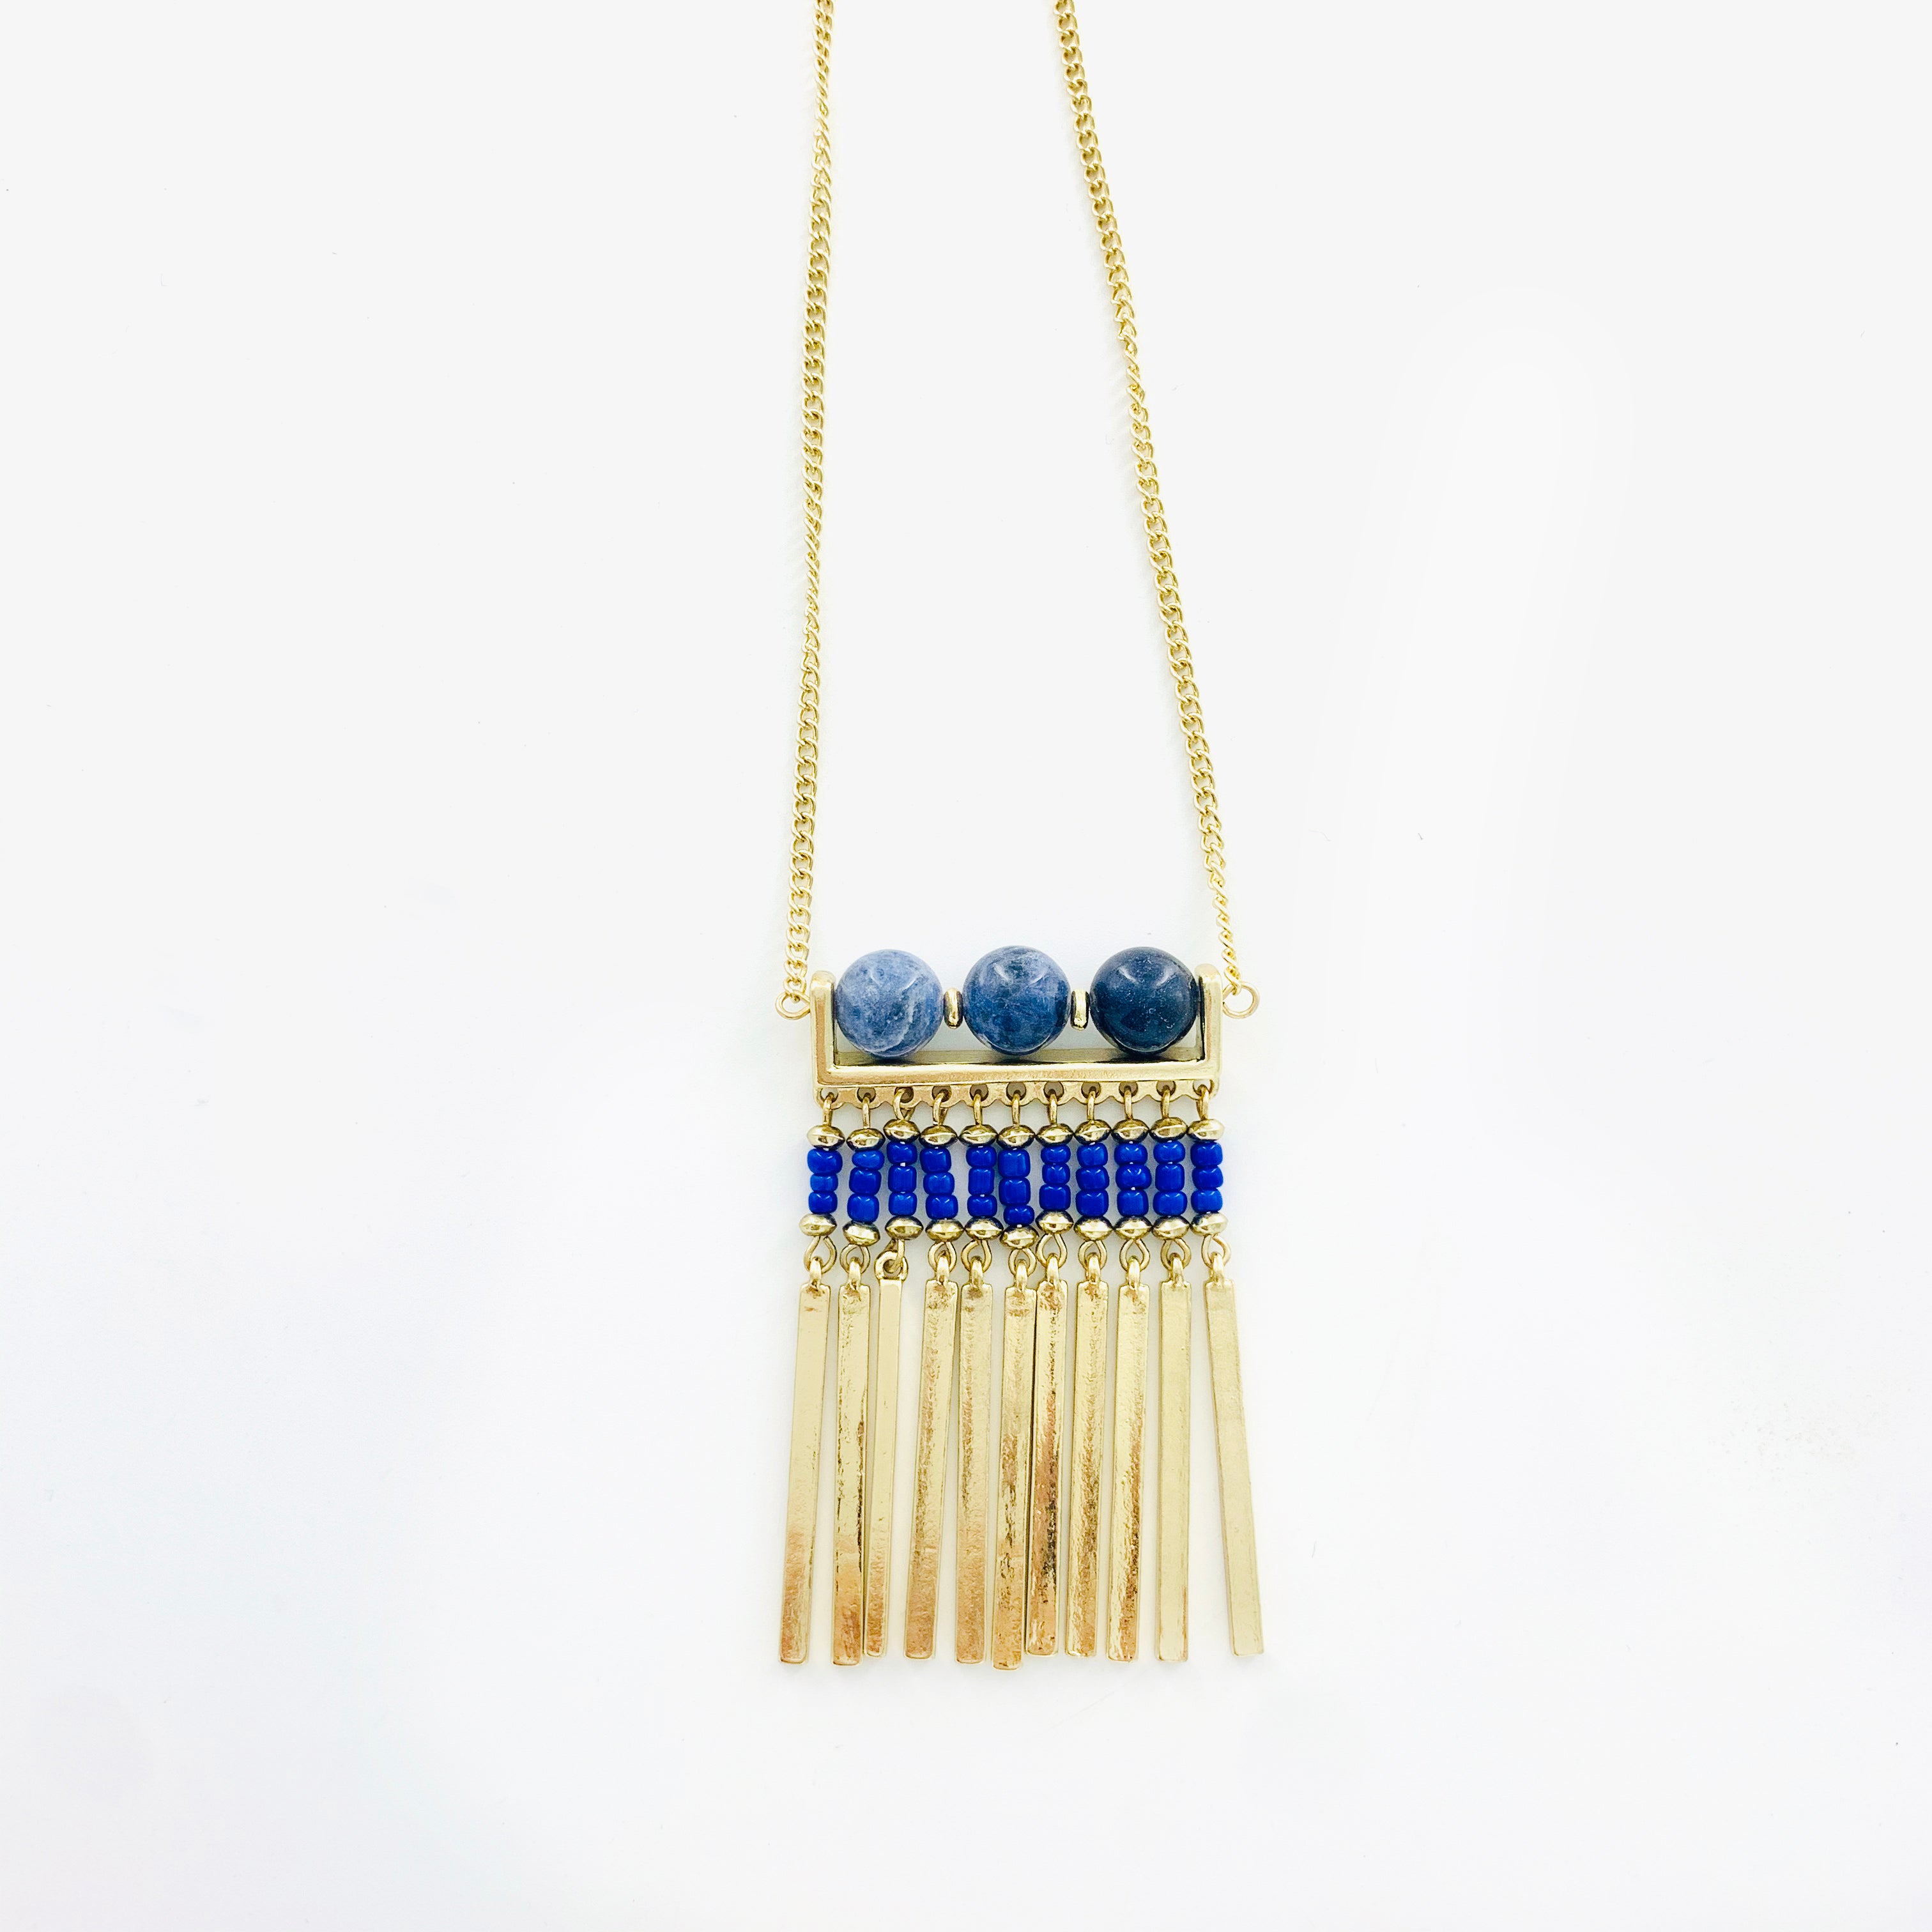 Necklace - Blue Bead and Gold Pendant on Gold Chain